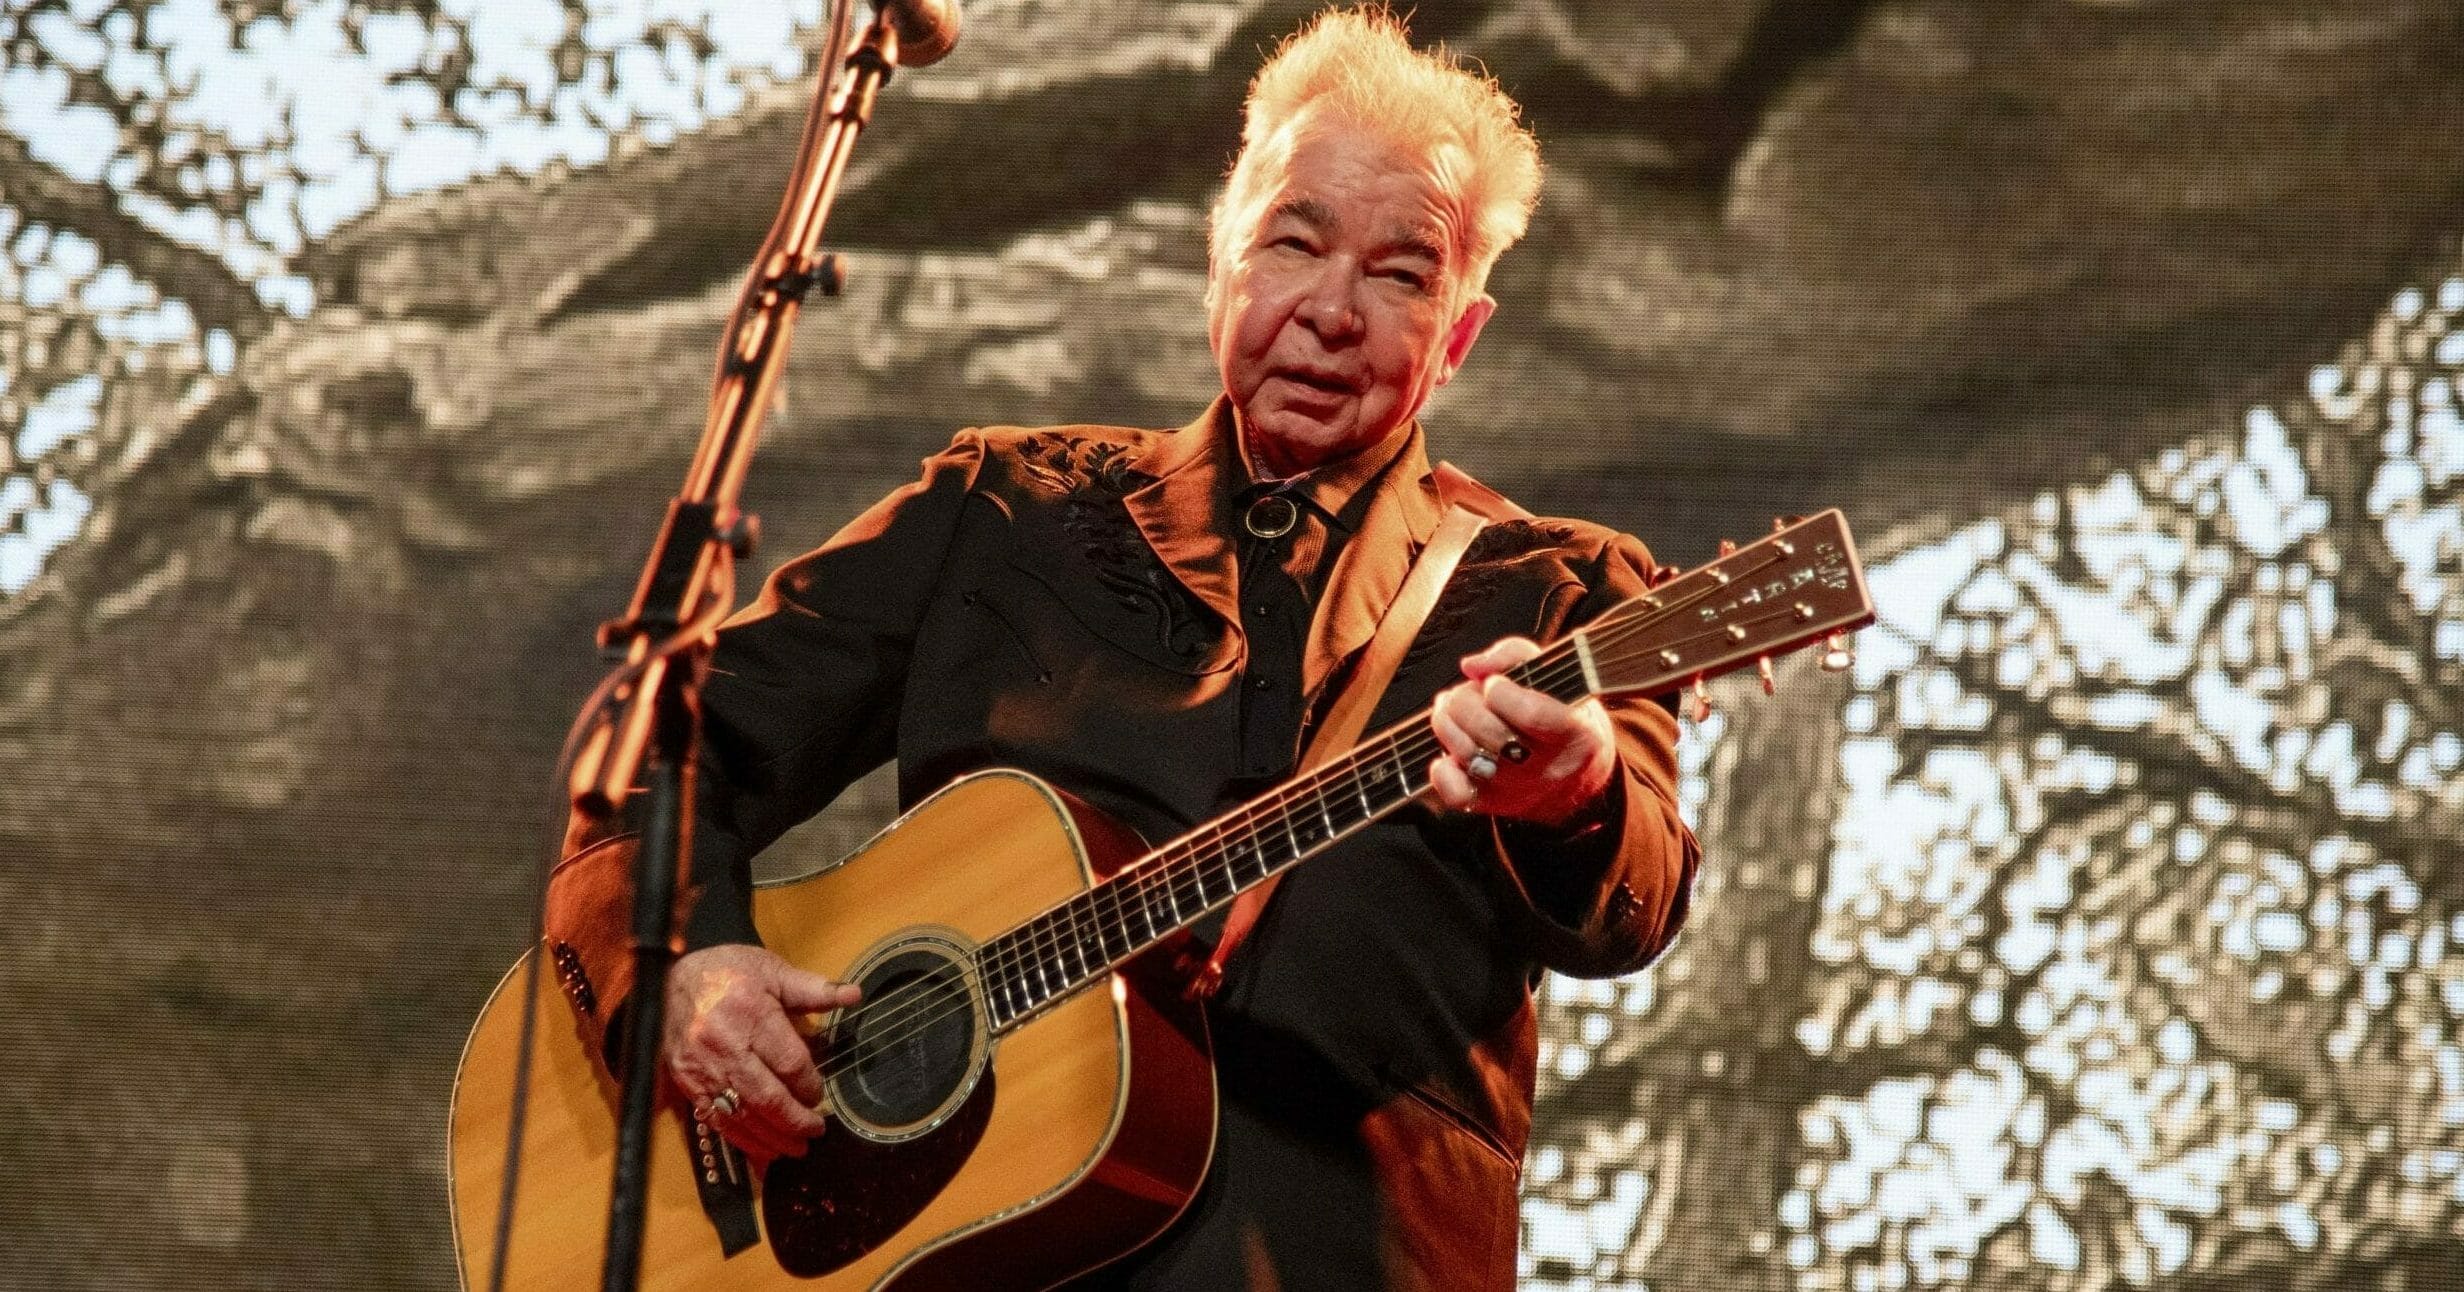 John Prine performs at the Bonnaroo Music and Arts Festival in Manchester, Tennessee, on June 15, 2019.